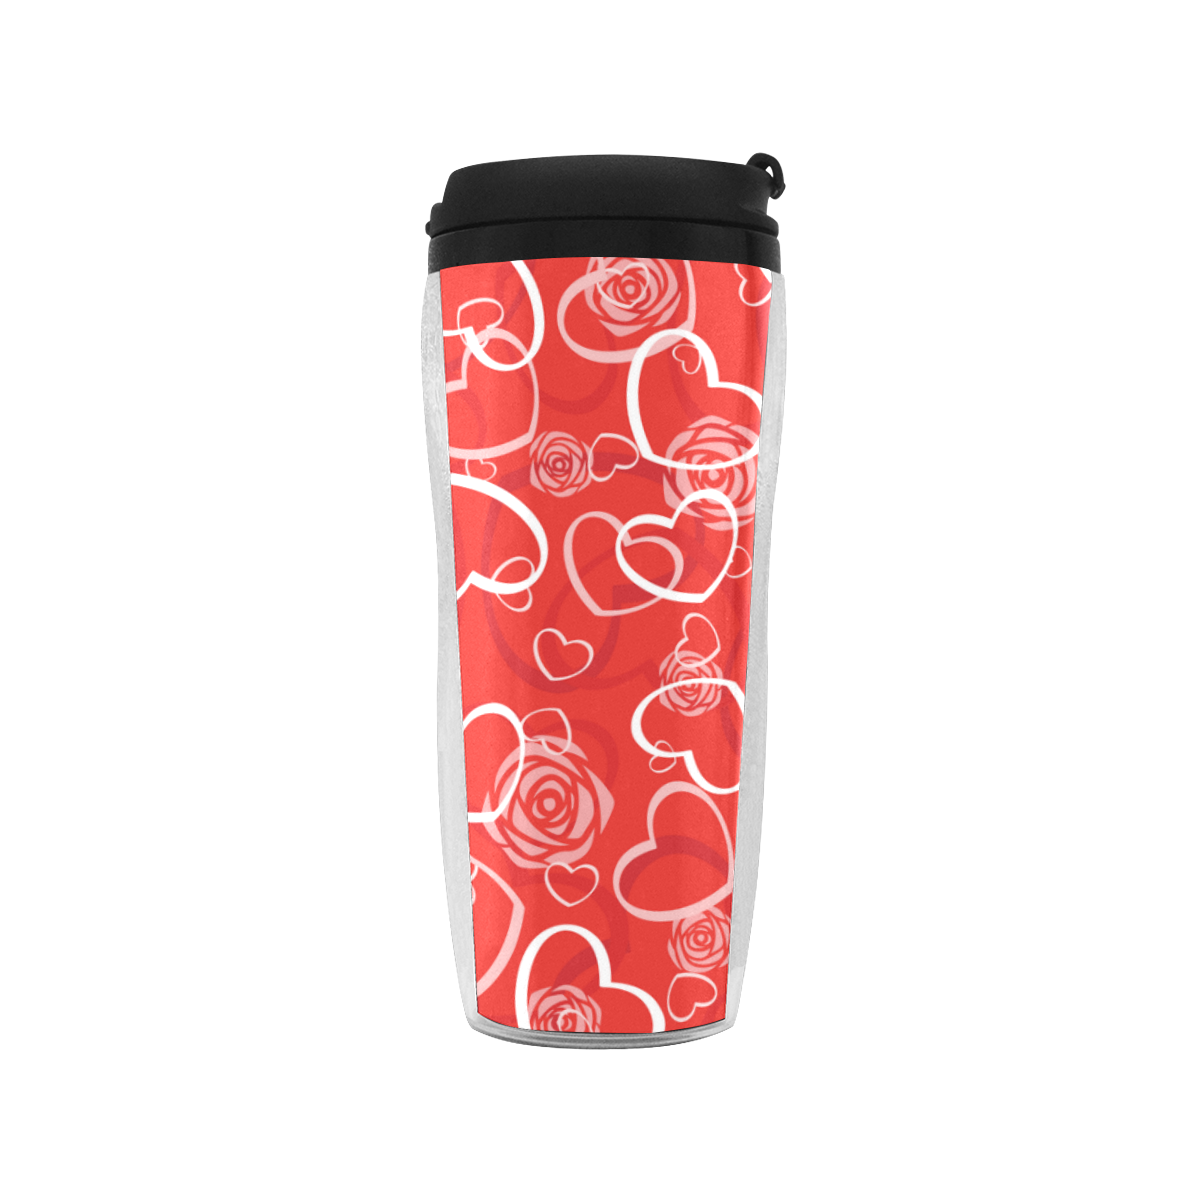 RED LOVE HEARTS Reusable Coffee Cup (11.8oz)